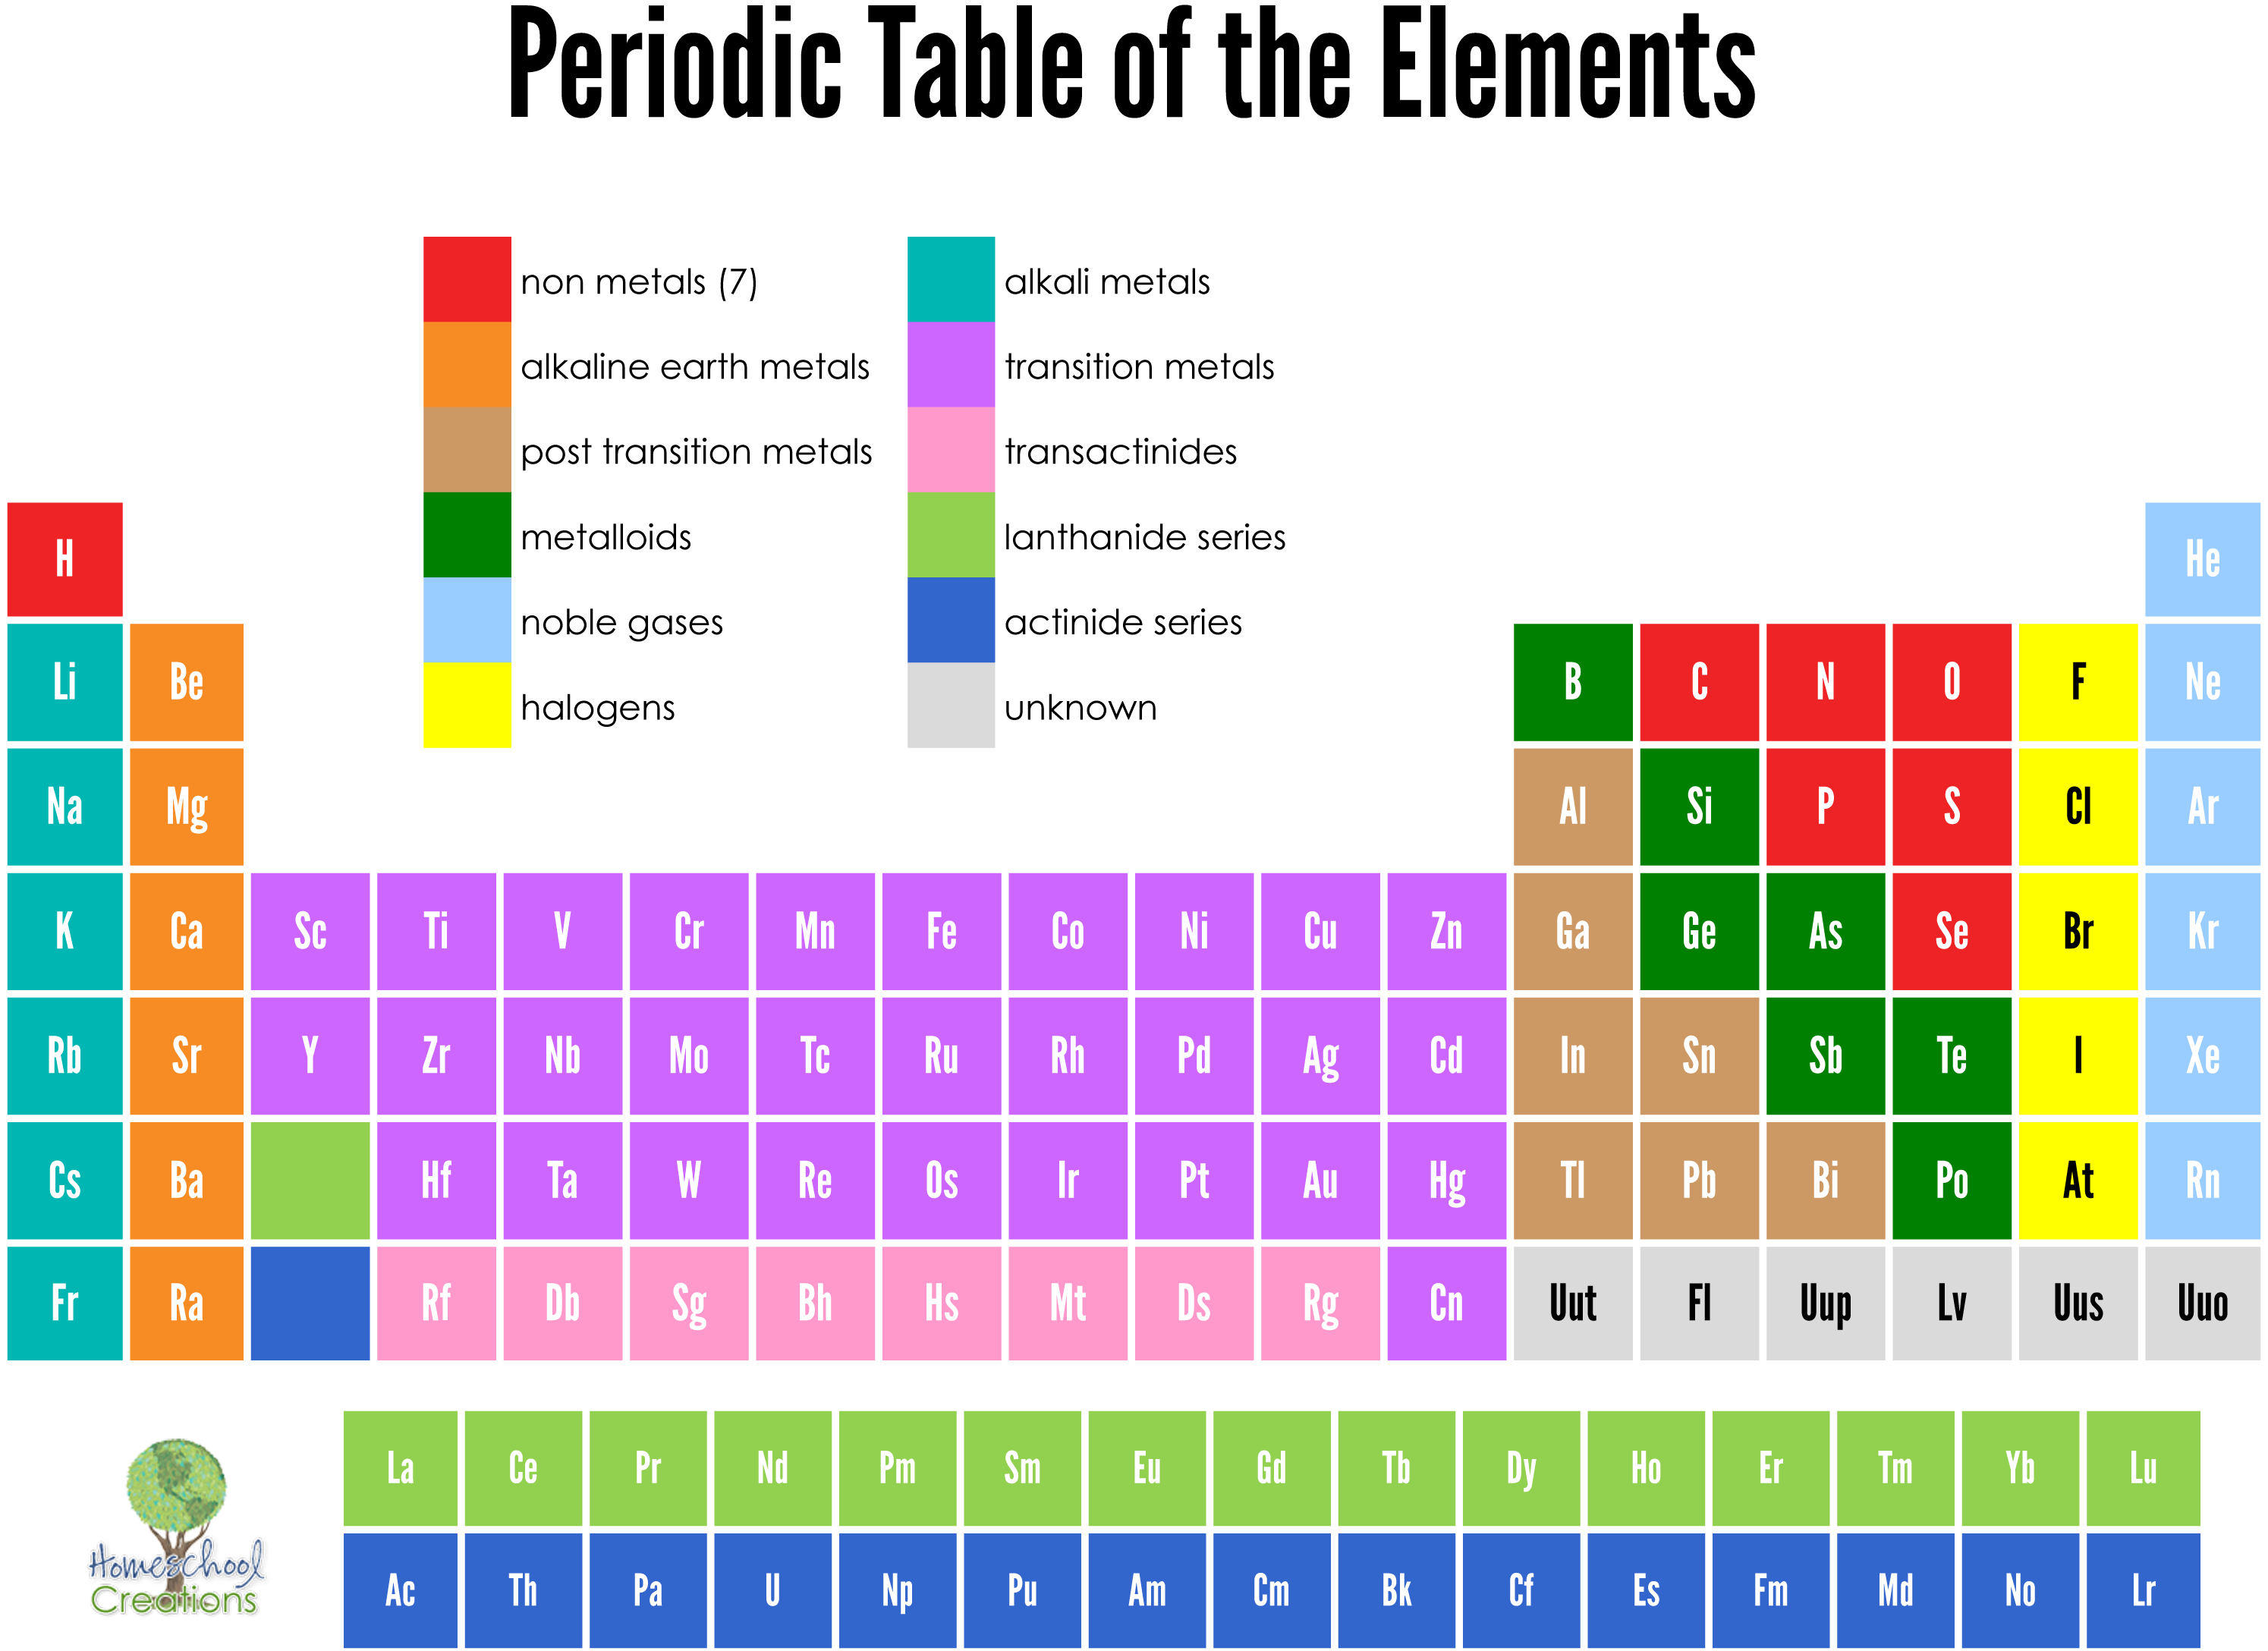 Most detailed printable periodic table of elements - radicalfad